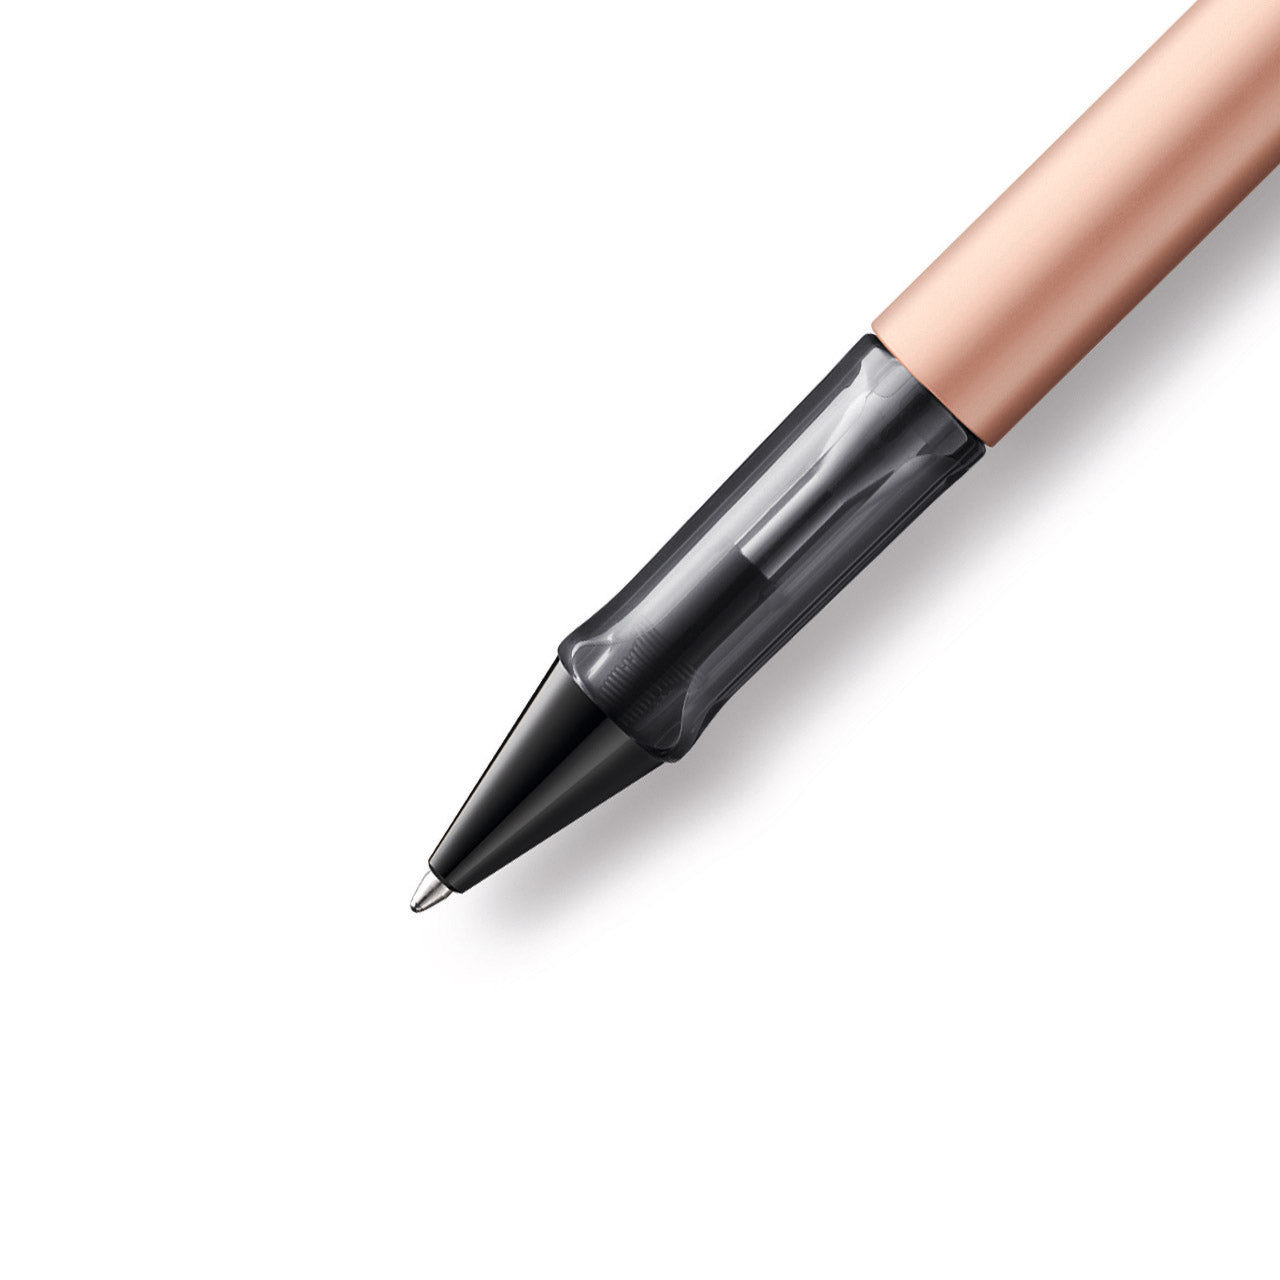 Lamy_LM-276_02_Simple_Beautiful_Things